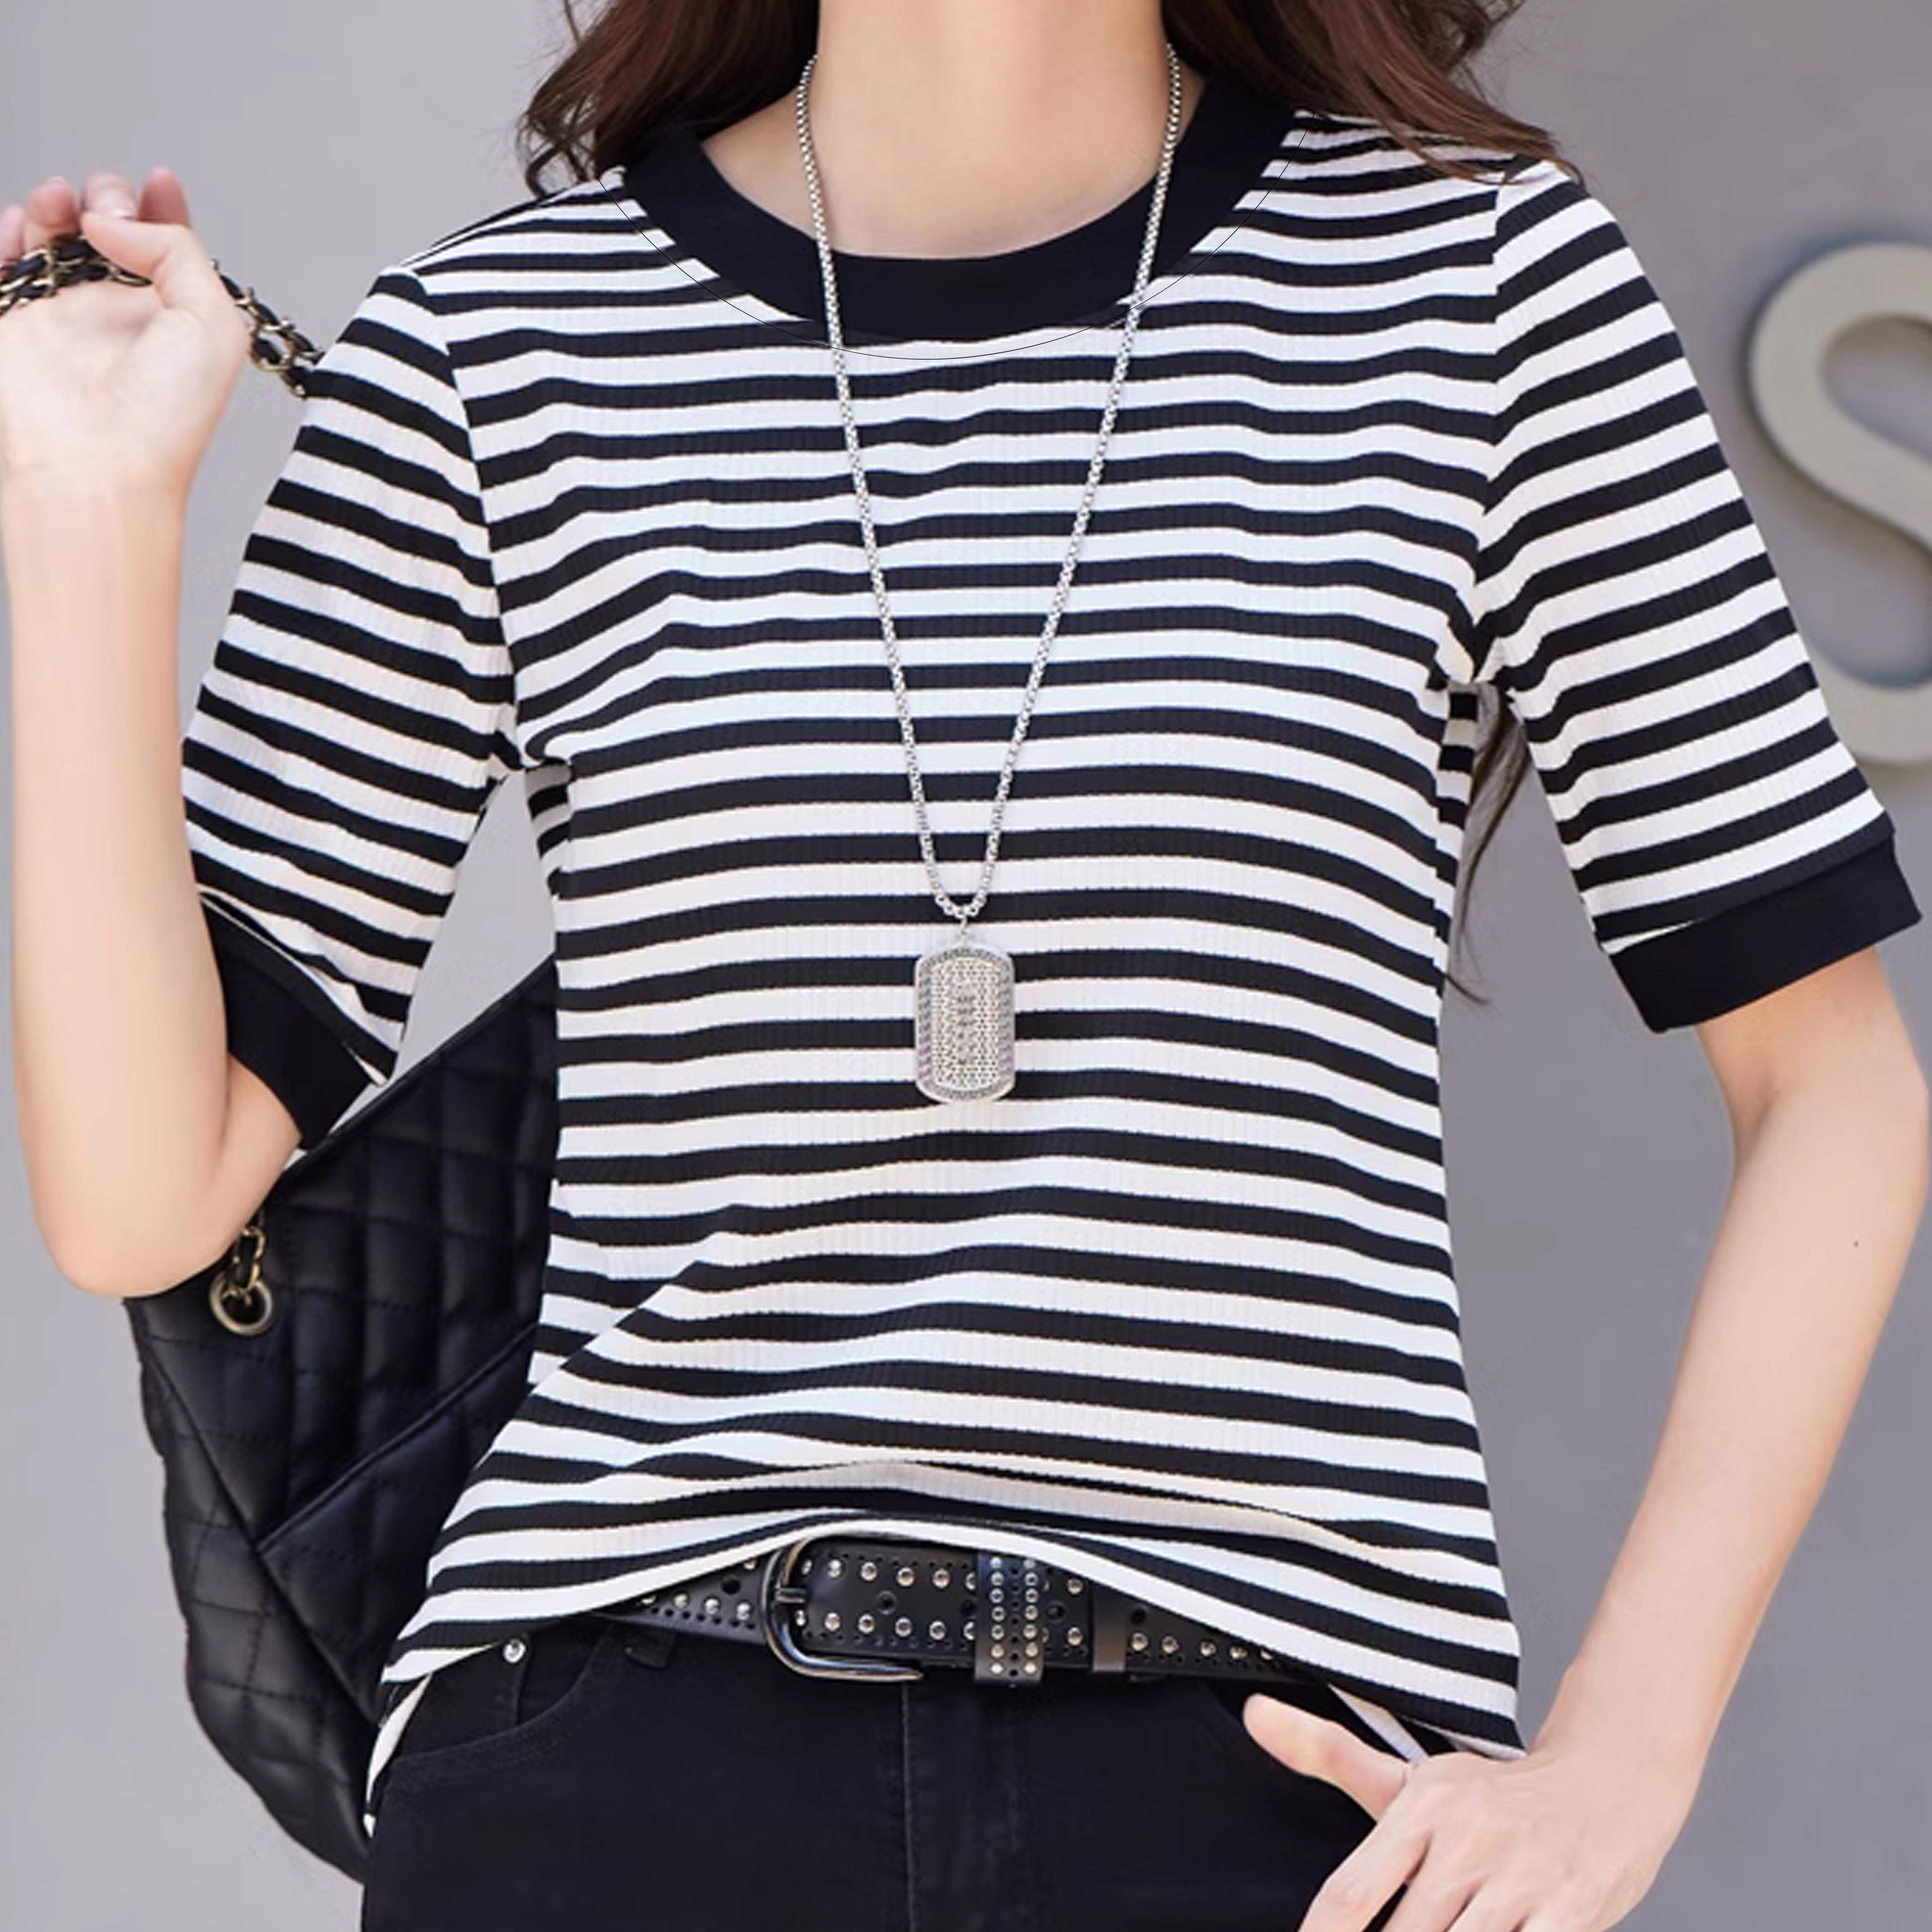 

Contrast Trim Striped T-shirt, Casual Crew Neck Short Sleeve T-shirt For Spring & Summer, Women's Clothing